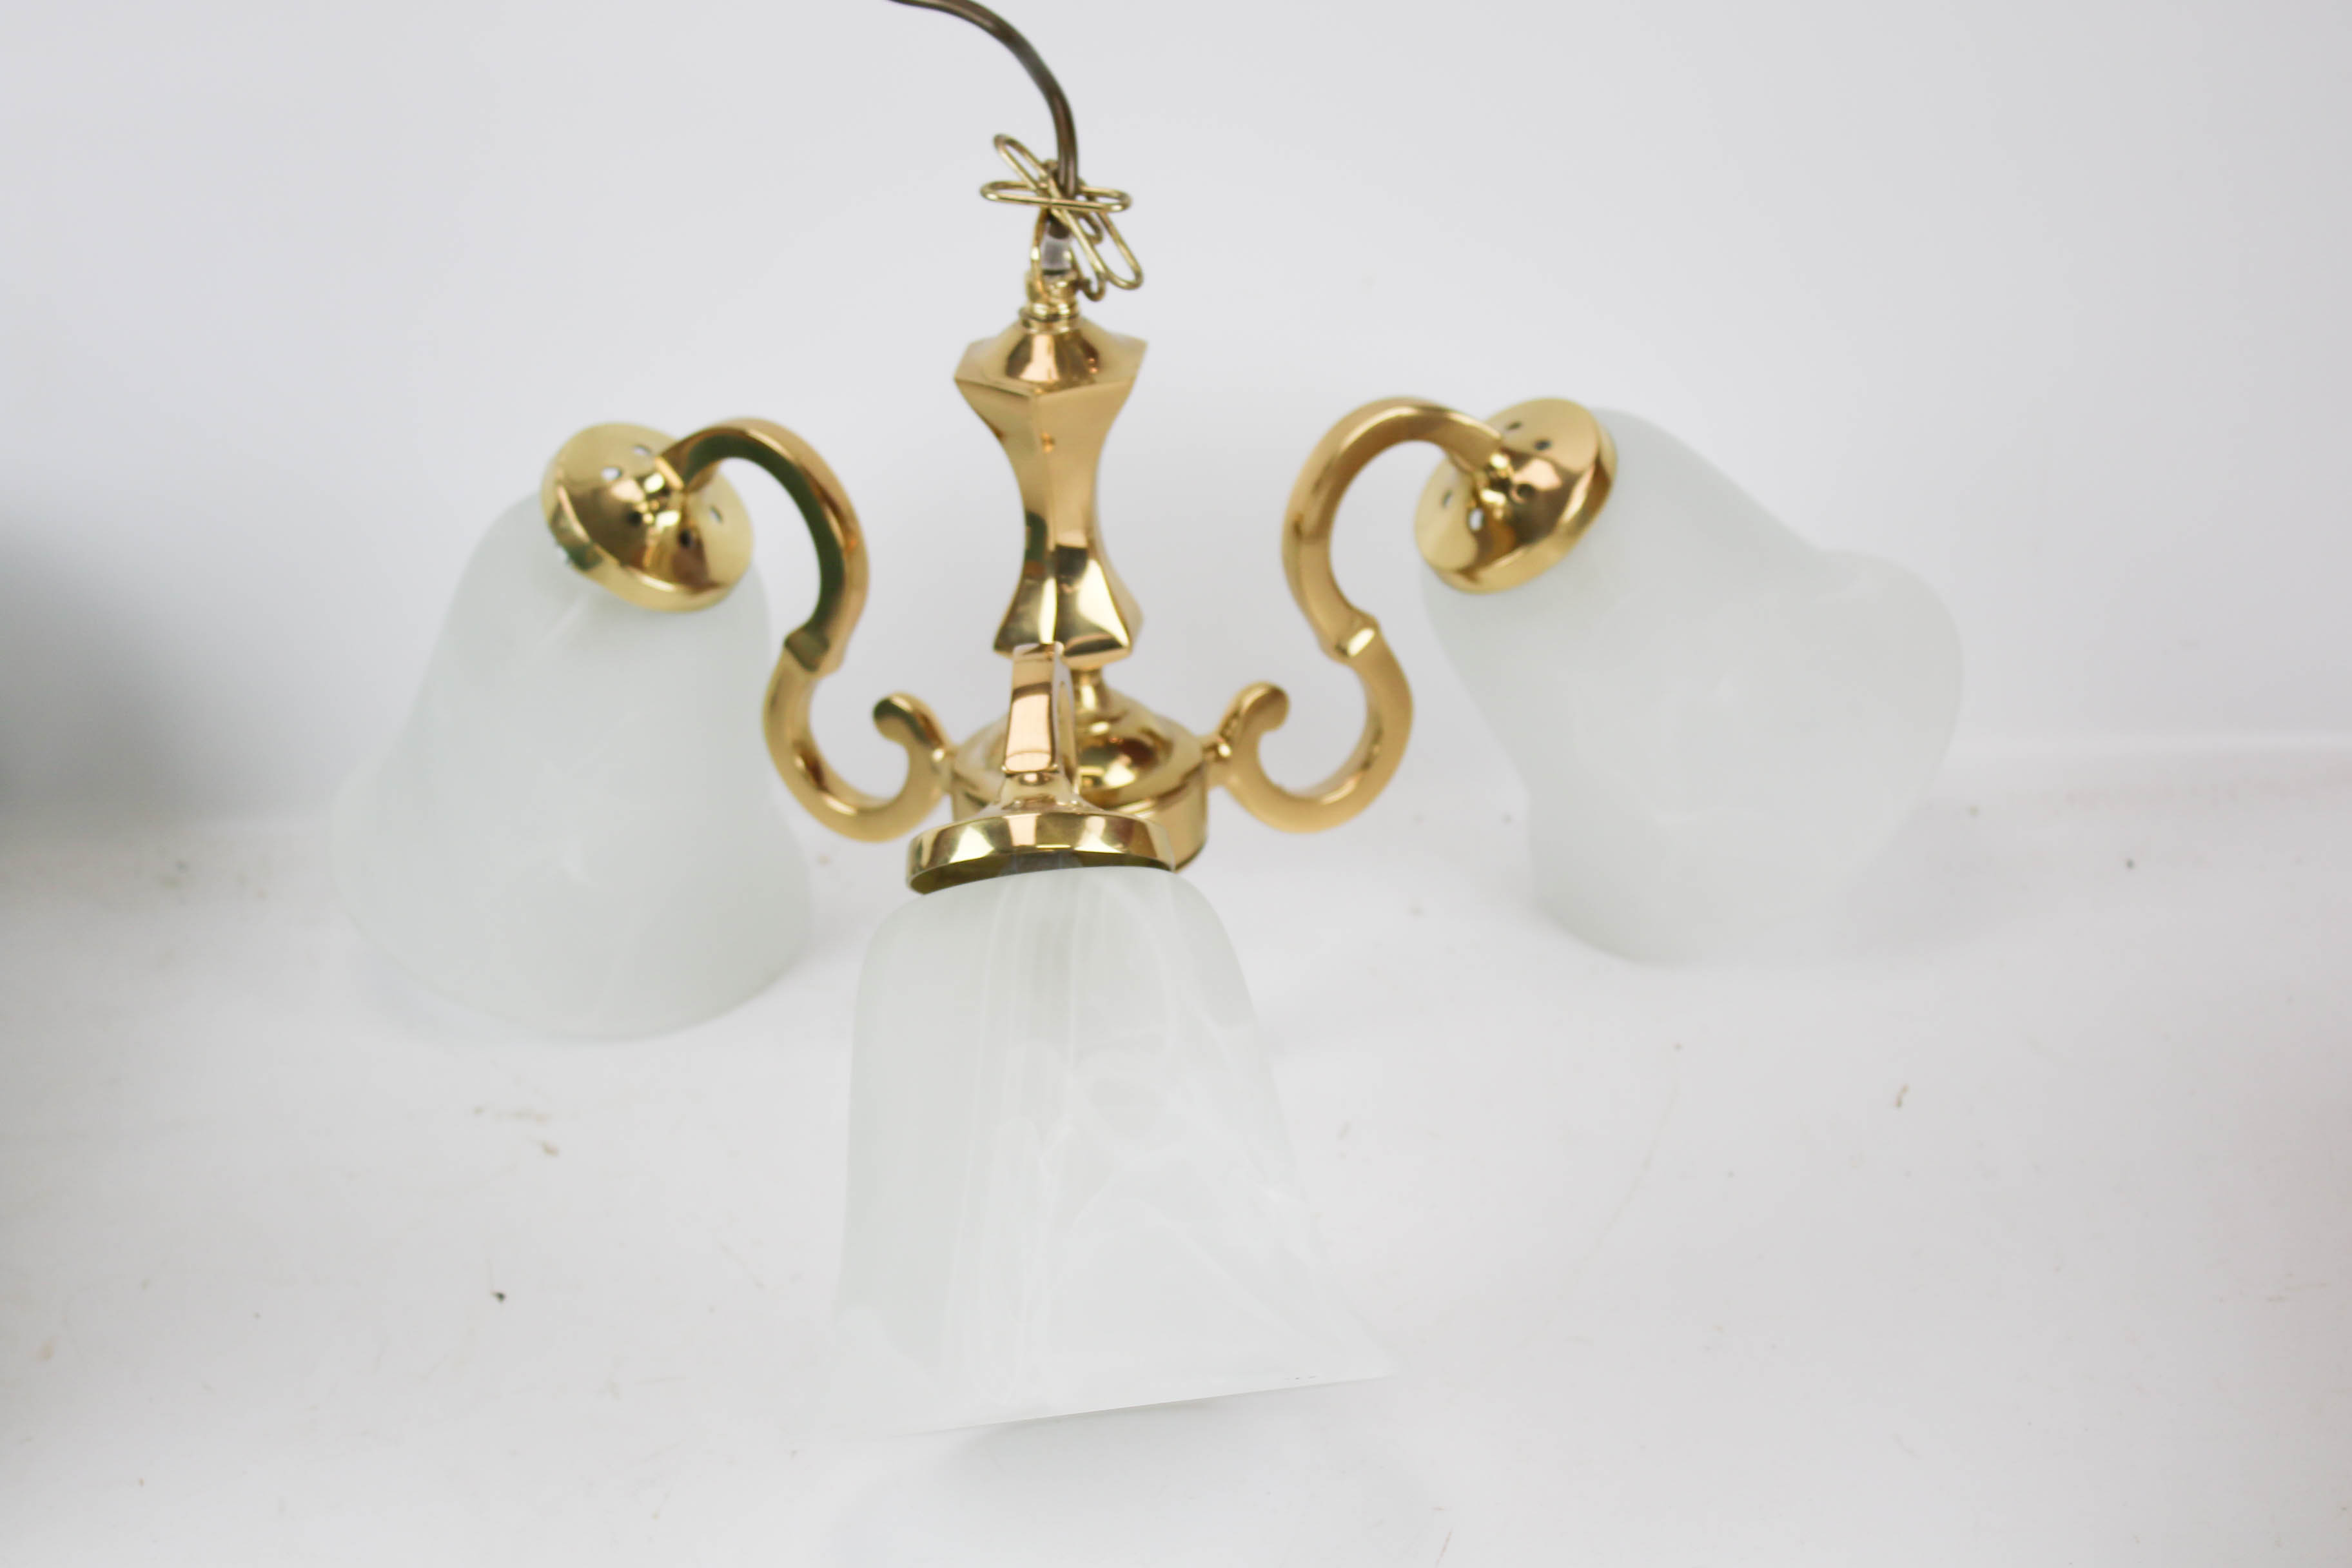 A 20th century brass ceiling light. - Image 2 of 2